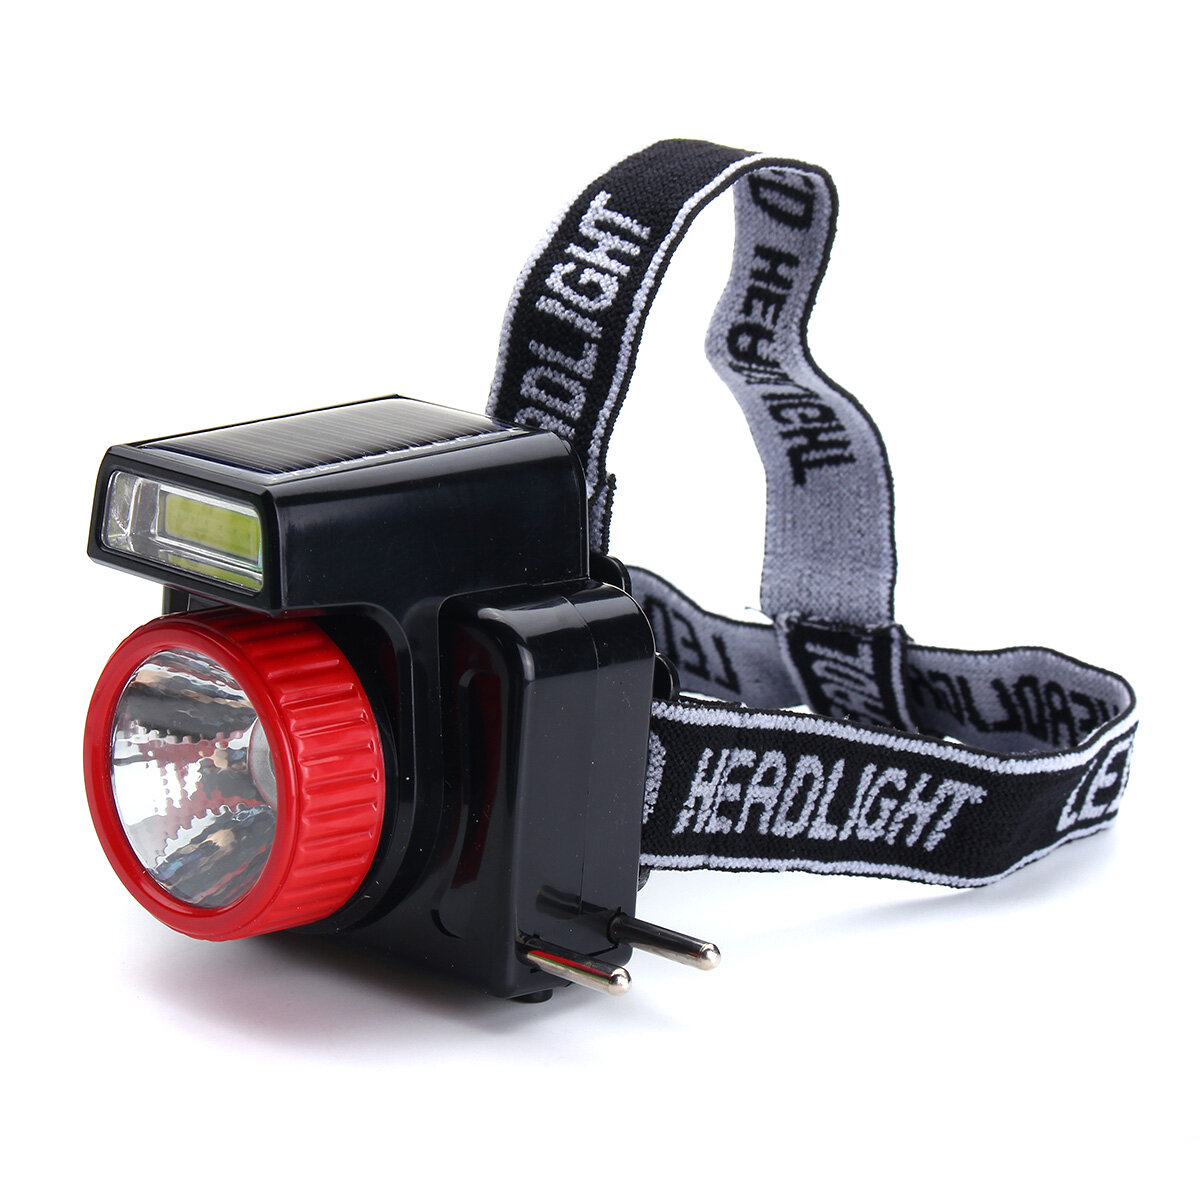 7LEDs COB Super Bright Solar LED Headlamp Energy Saving Outdoor Head Torch Light For Sports Camping Fishing Searching